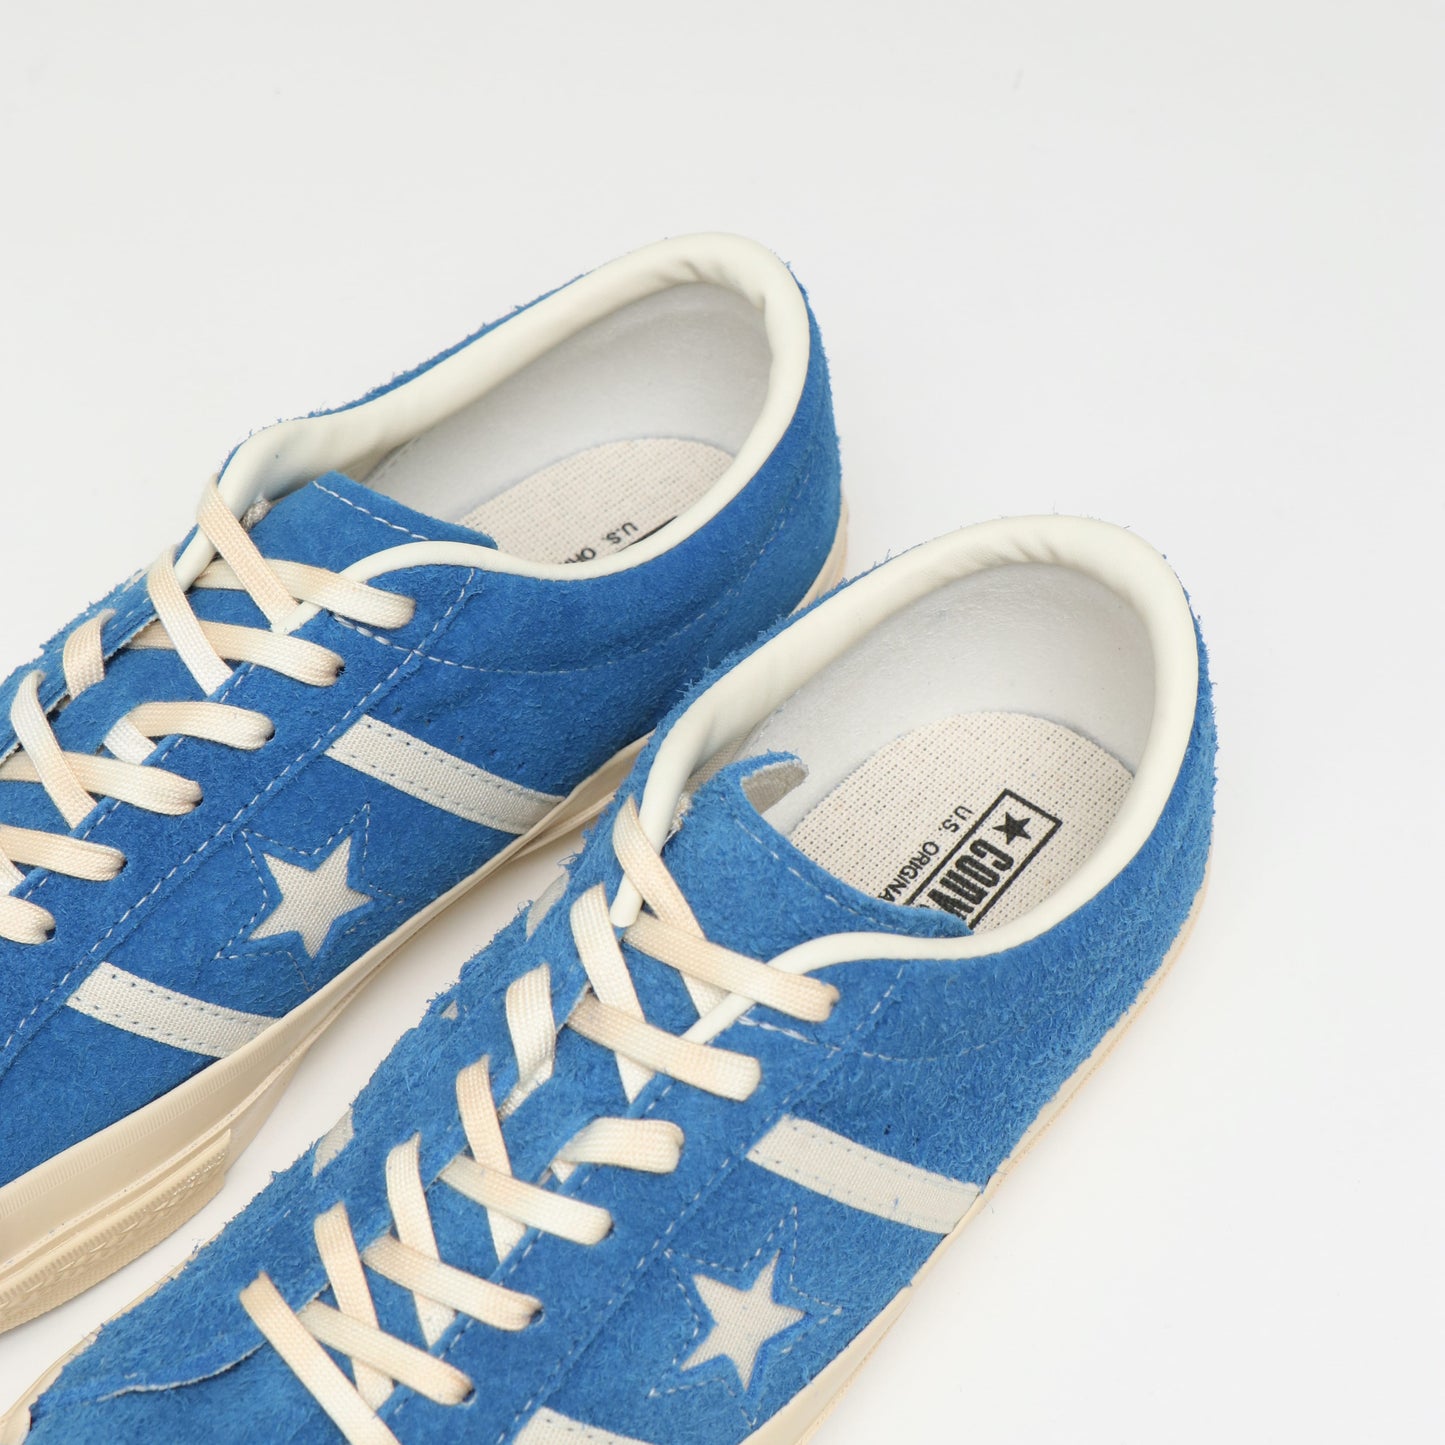 STAR&BARS US SUEDE